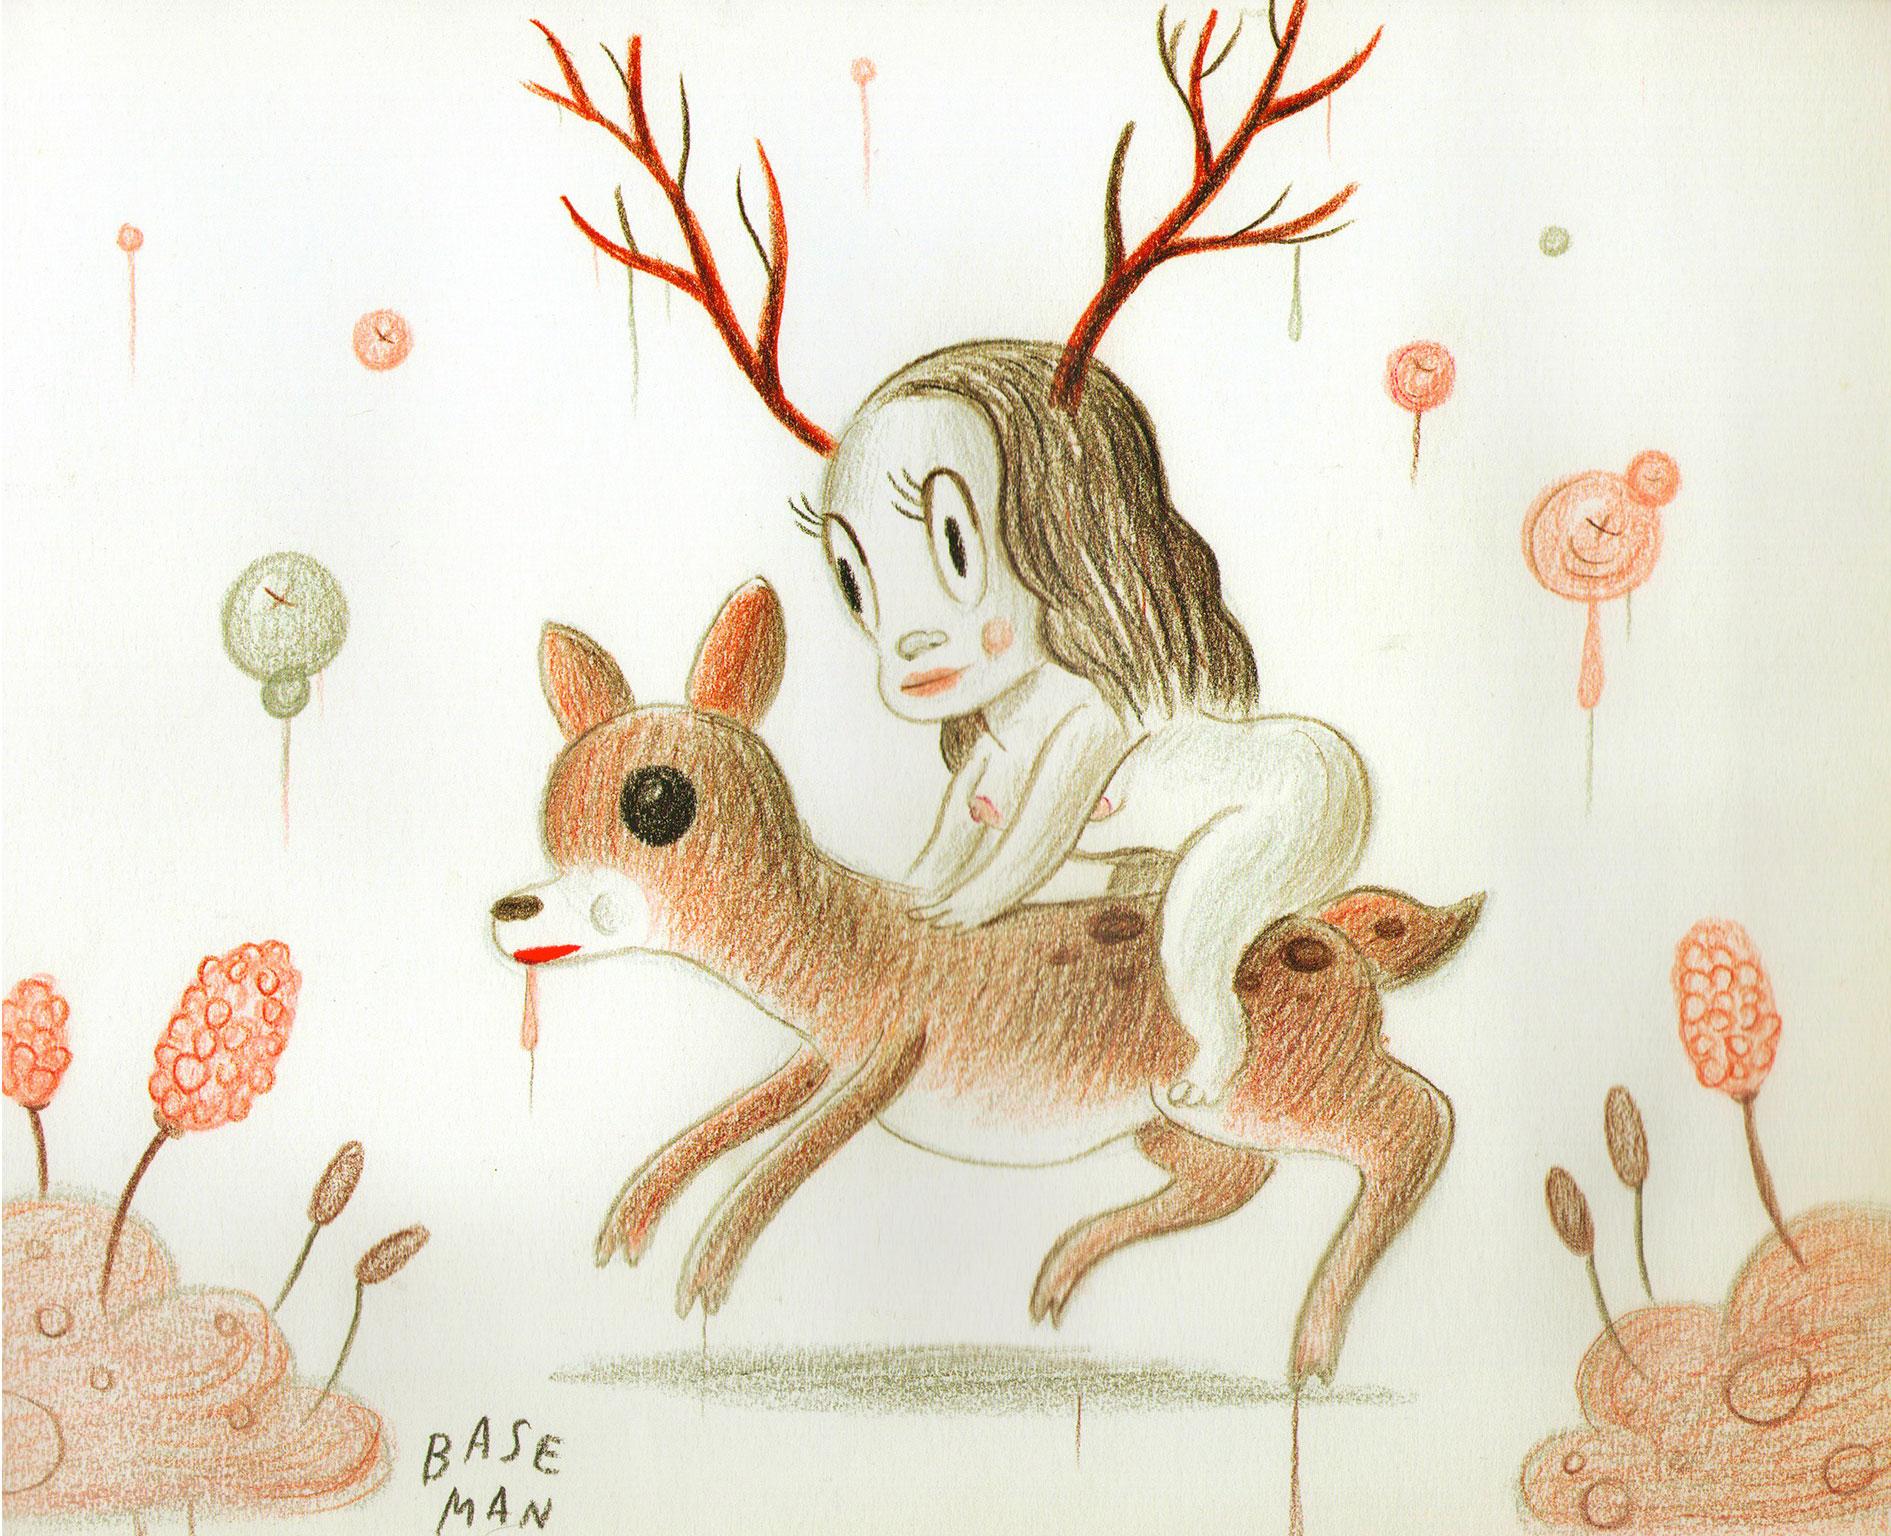 Unique drawing by American Pop Artist Gary Baseman, with framing handpicked by the Artist. Price includes the original exhibition frame and worldwide shipping.

“I ran away this spring and hid in the woods. I ran so fast I did not look where I was